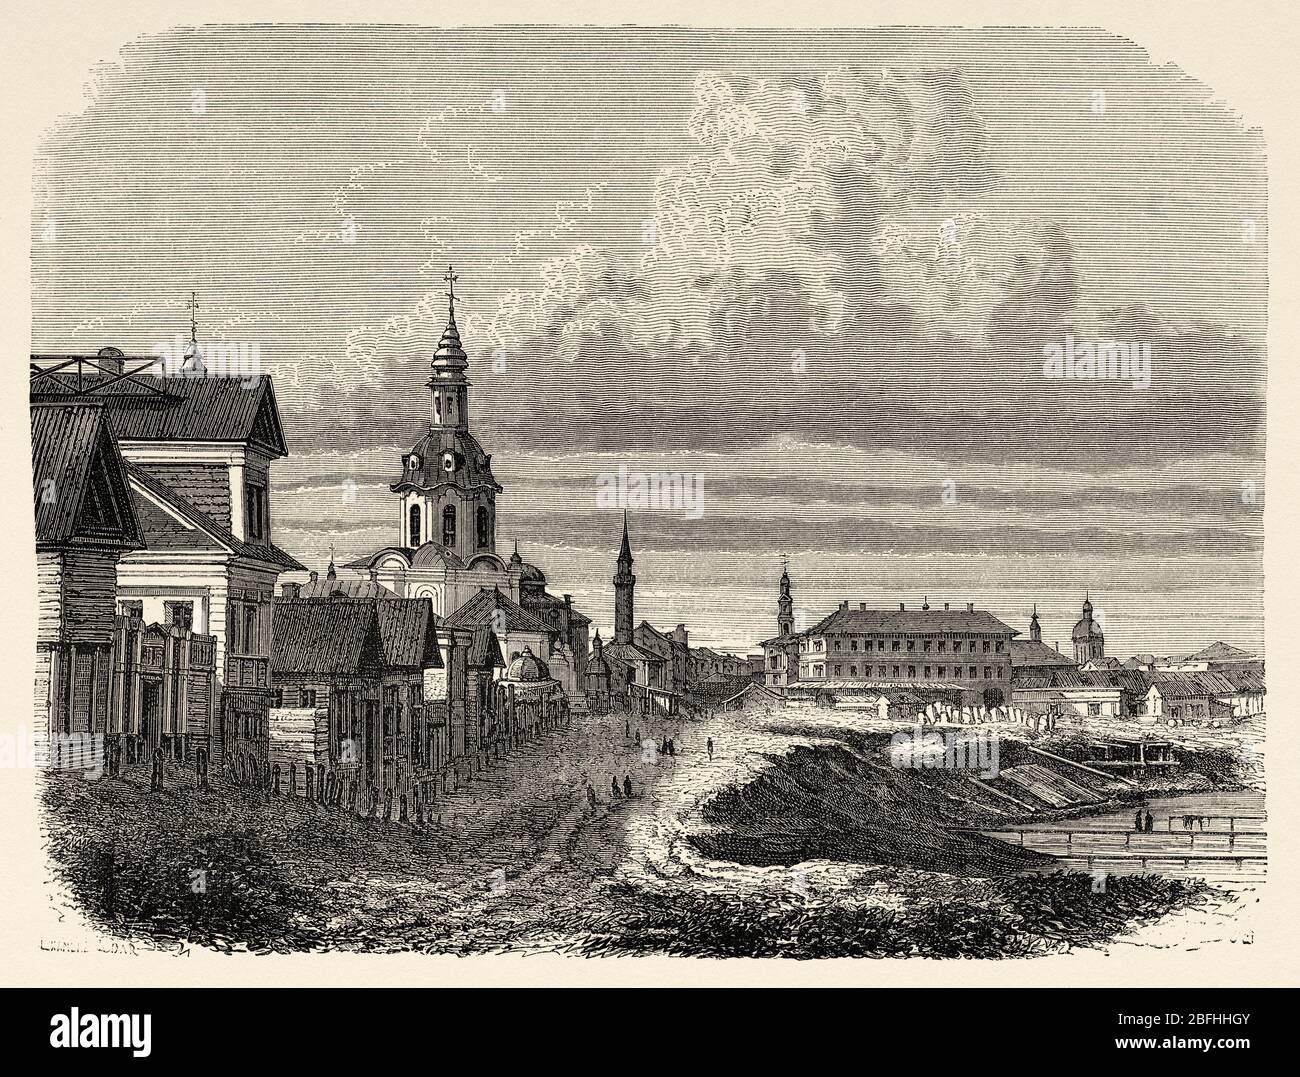 Panoramic view city of Kazan, capital and largest city of the Republic of Tatarstan, Russia. Old engraving illustration, Travel to Free Russia 1869 by Stock Photo